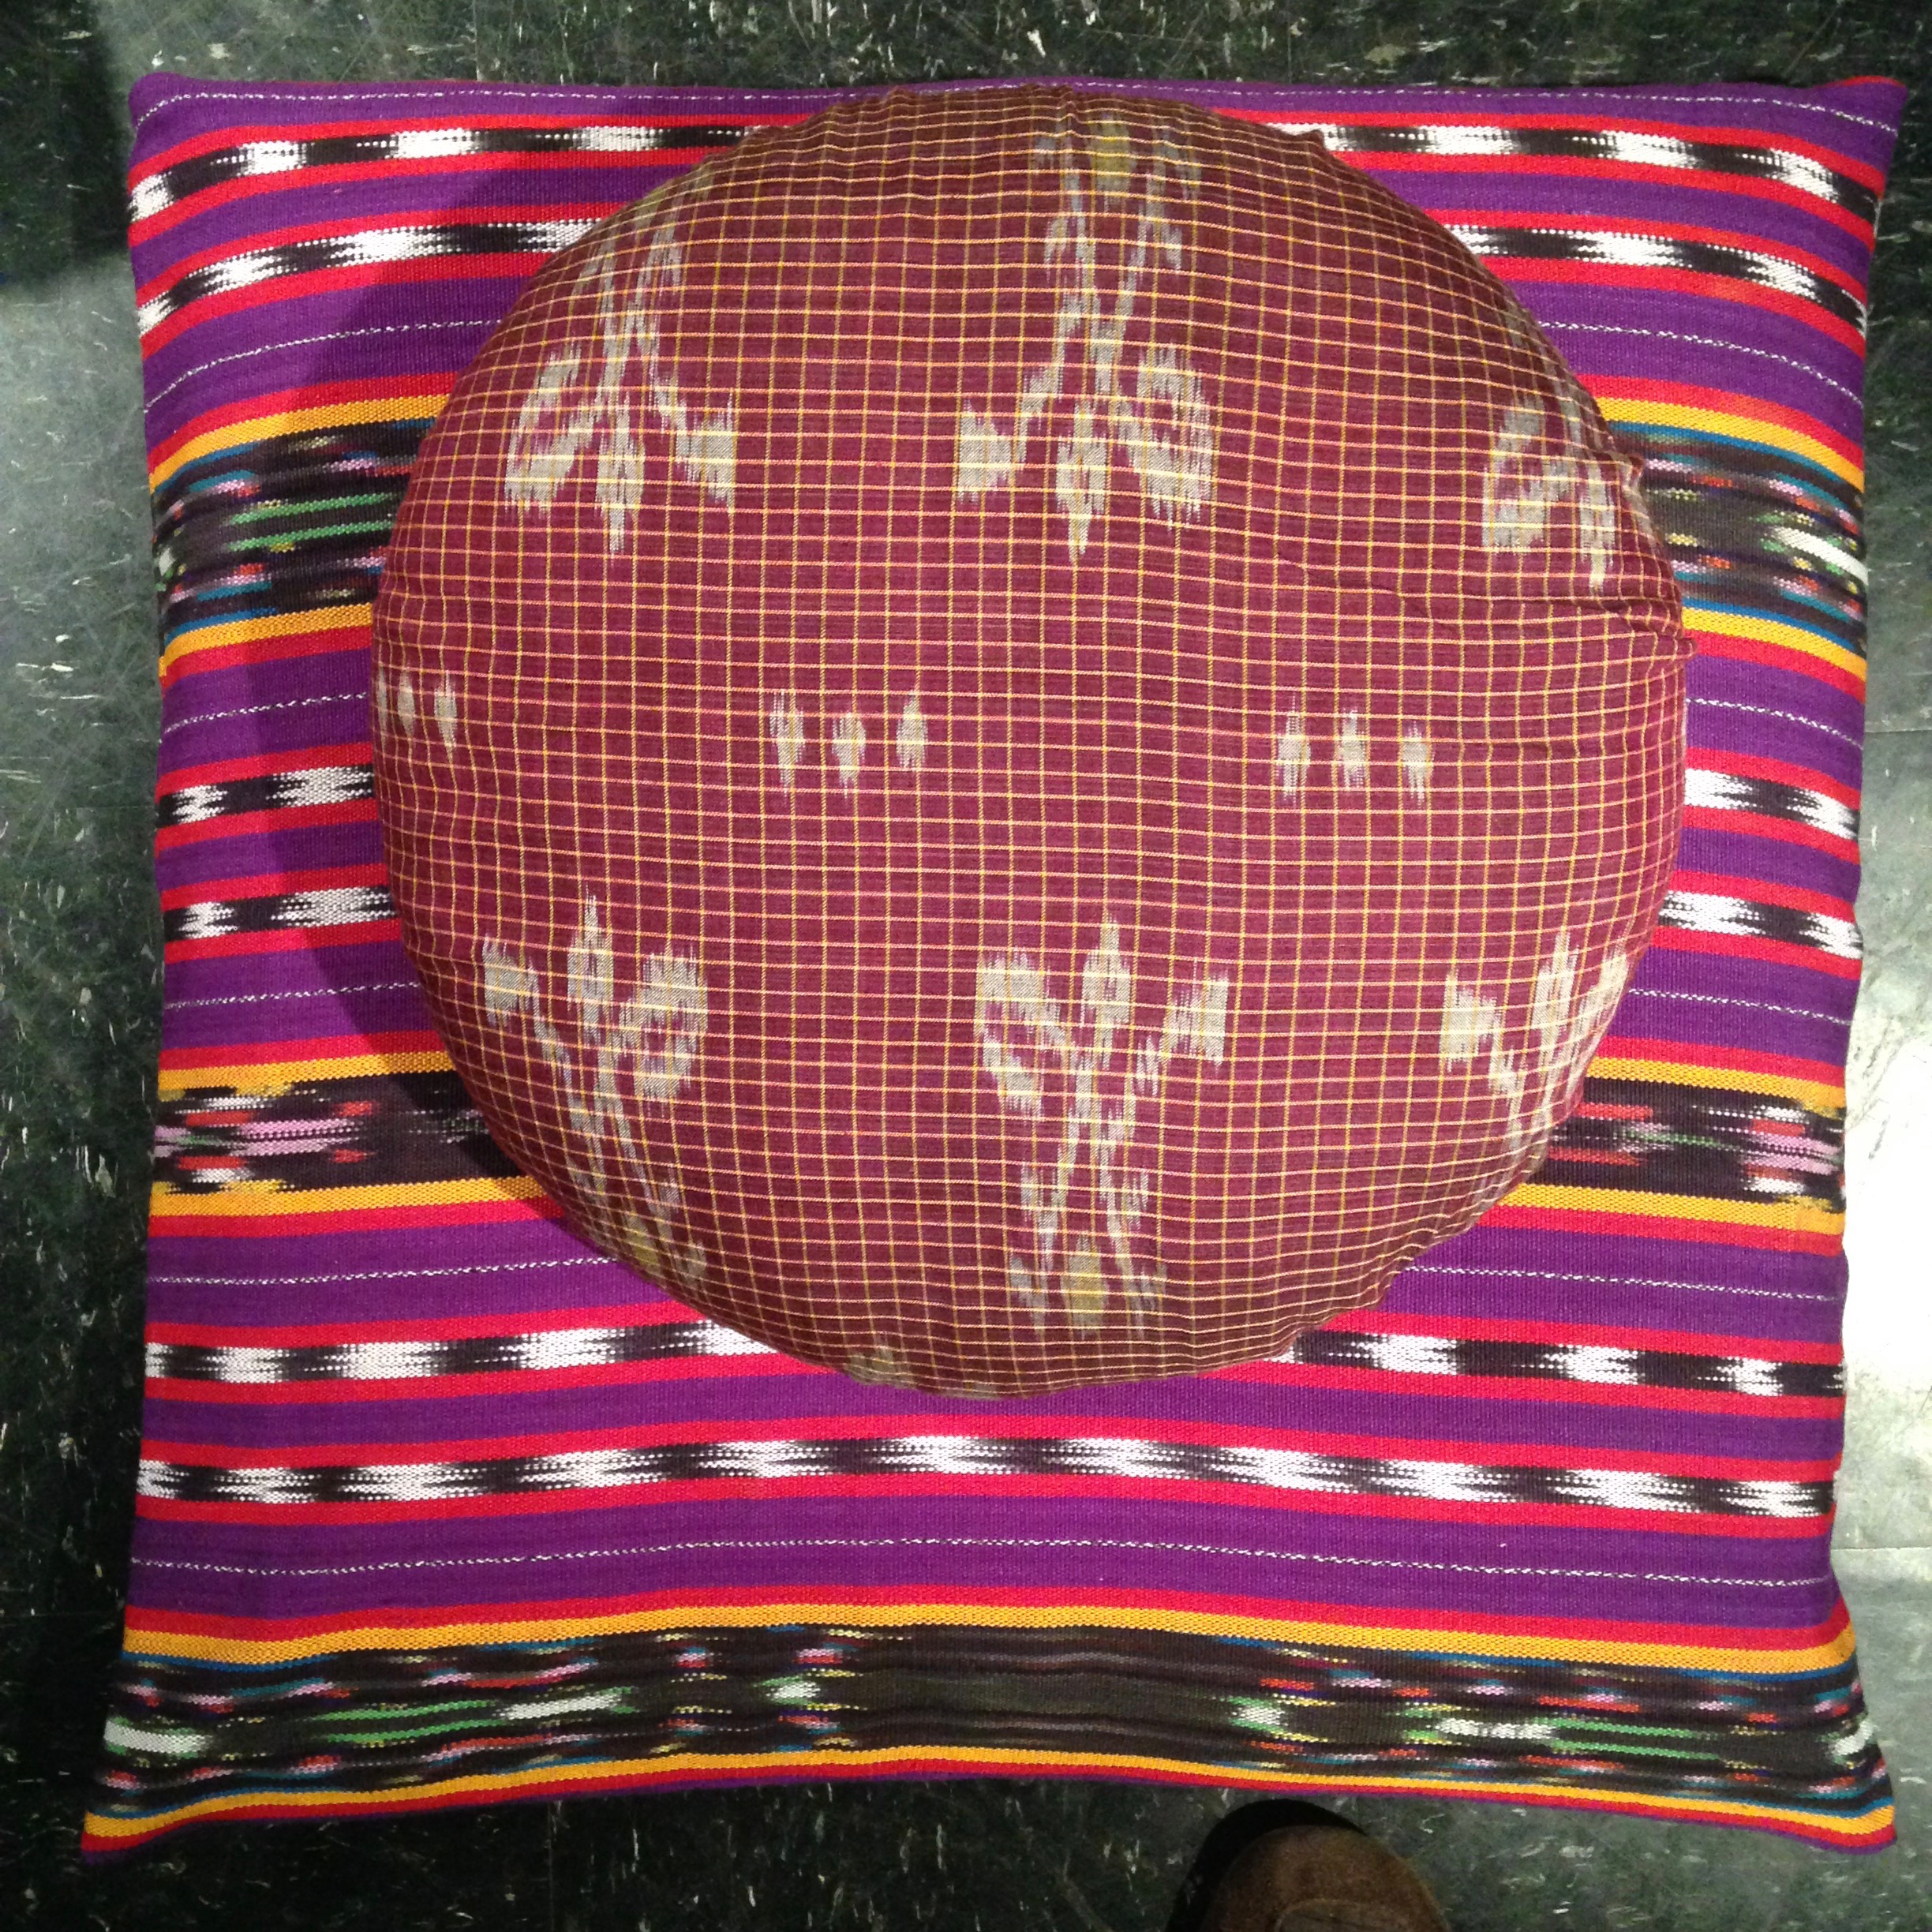 Set of meditation cushions for The Mandala Project. Each set covered in textiles form around the world including, Bali, Guatemala, Africa, Java, Australia. 2015